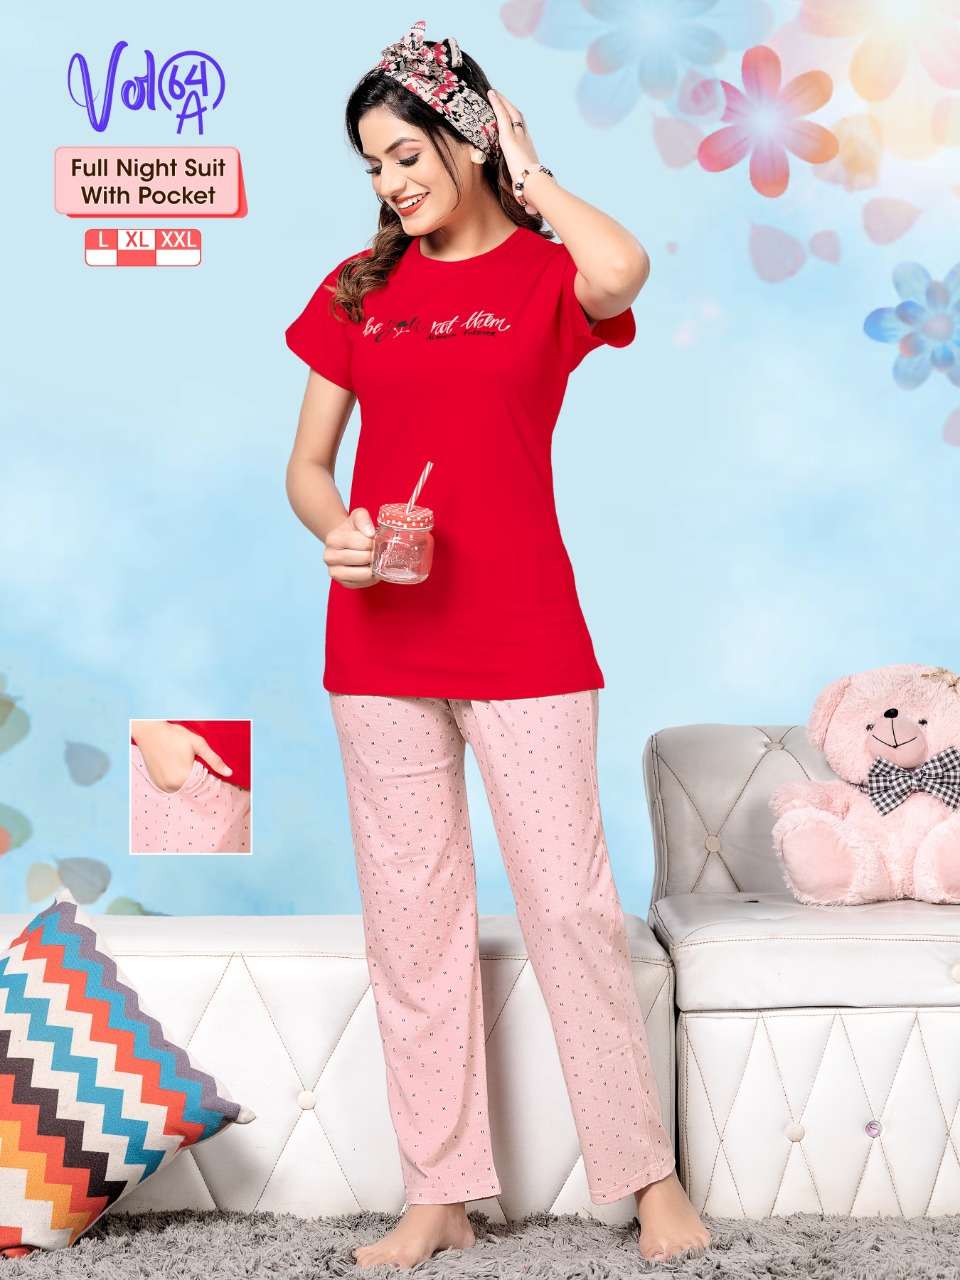 FASHION TALK VOL.64 A Heavy Shinker Hosiery Cotton Night Suits With Pocket CATALOG WHOLESALER BEST RATE